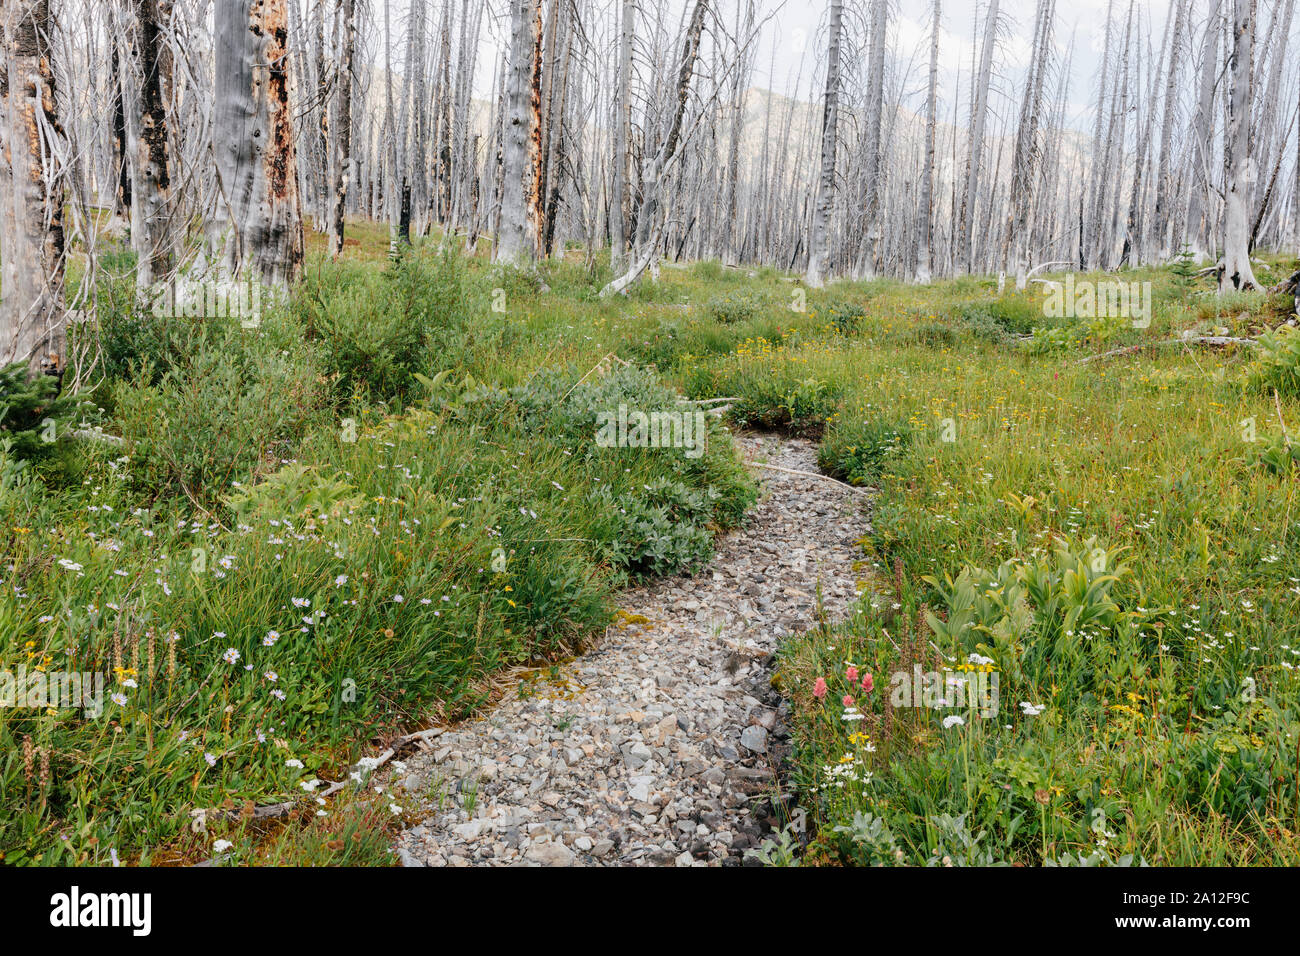 A previously burnt subalpine forest rebounds in summer with lodgepole pine and a variety of wildflowers, yarrow, aster, arnica and corn lily. Stock Photo